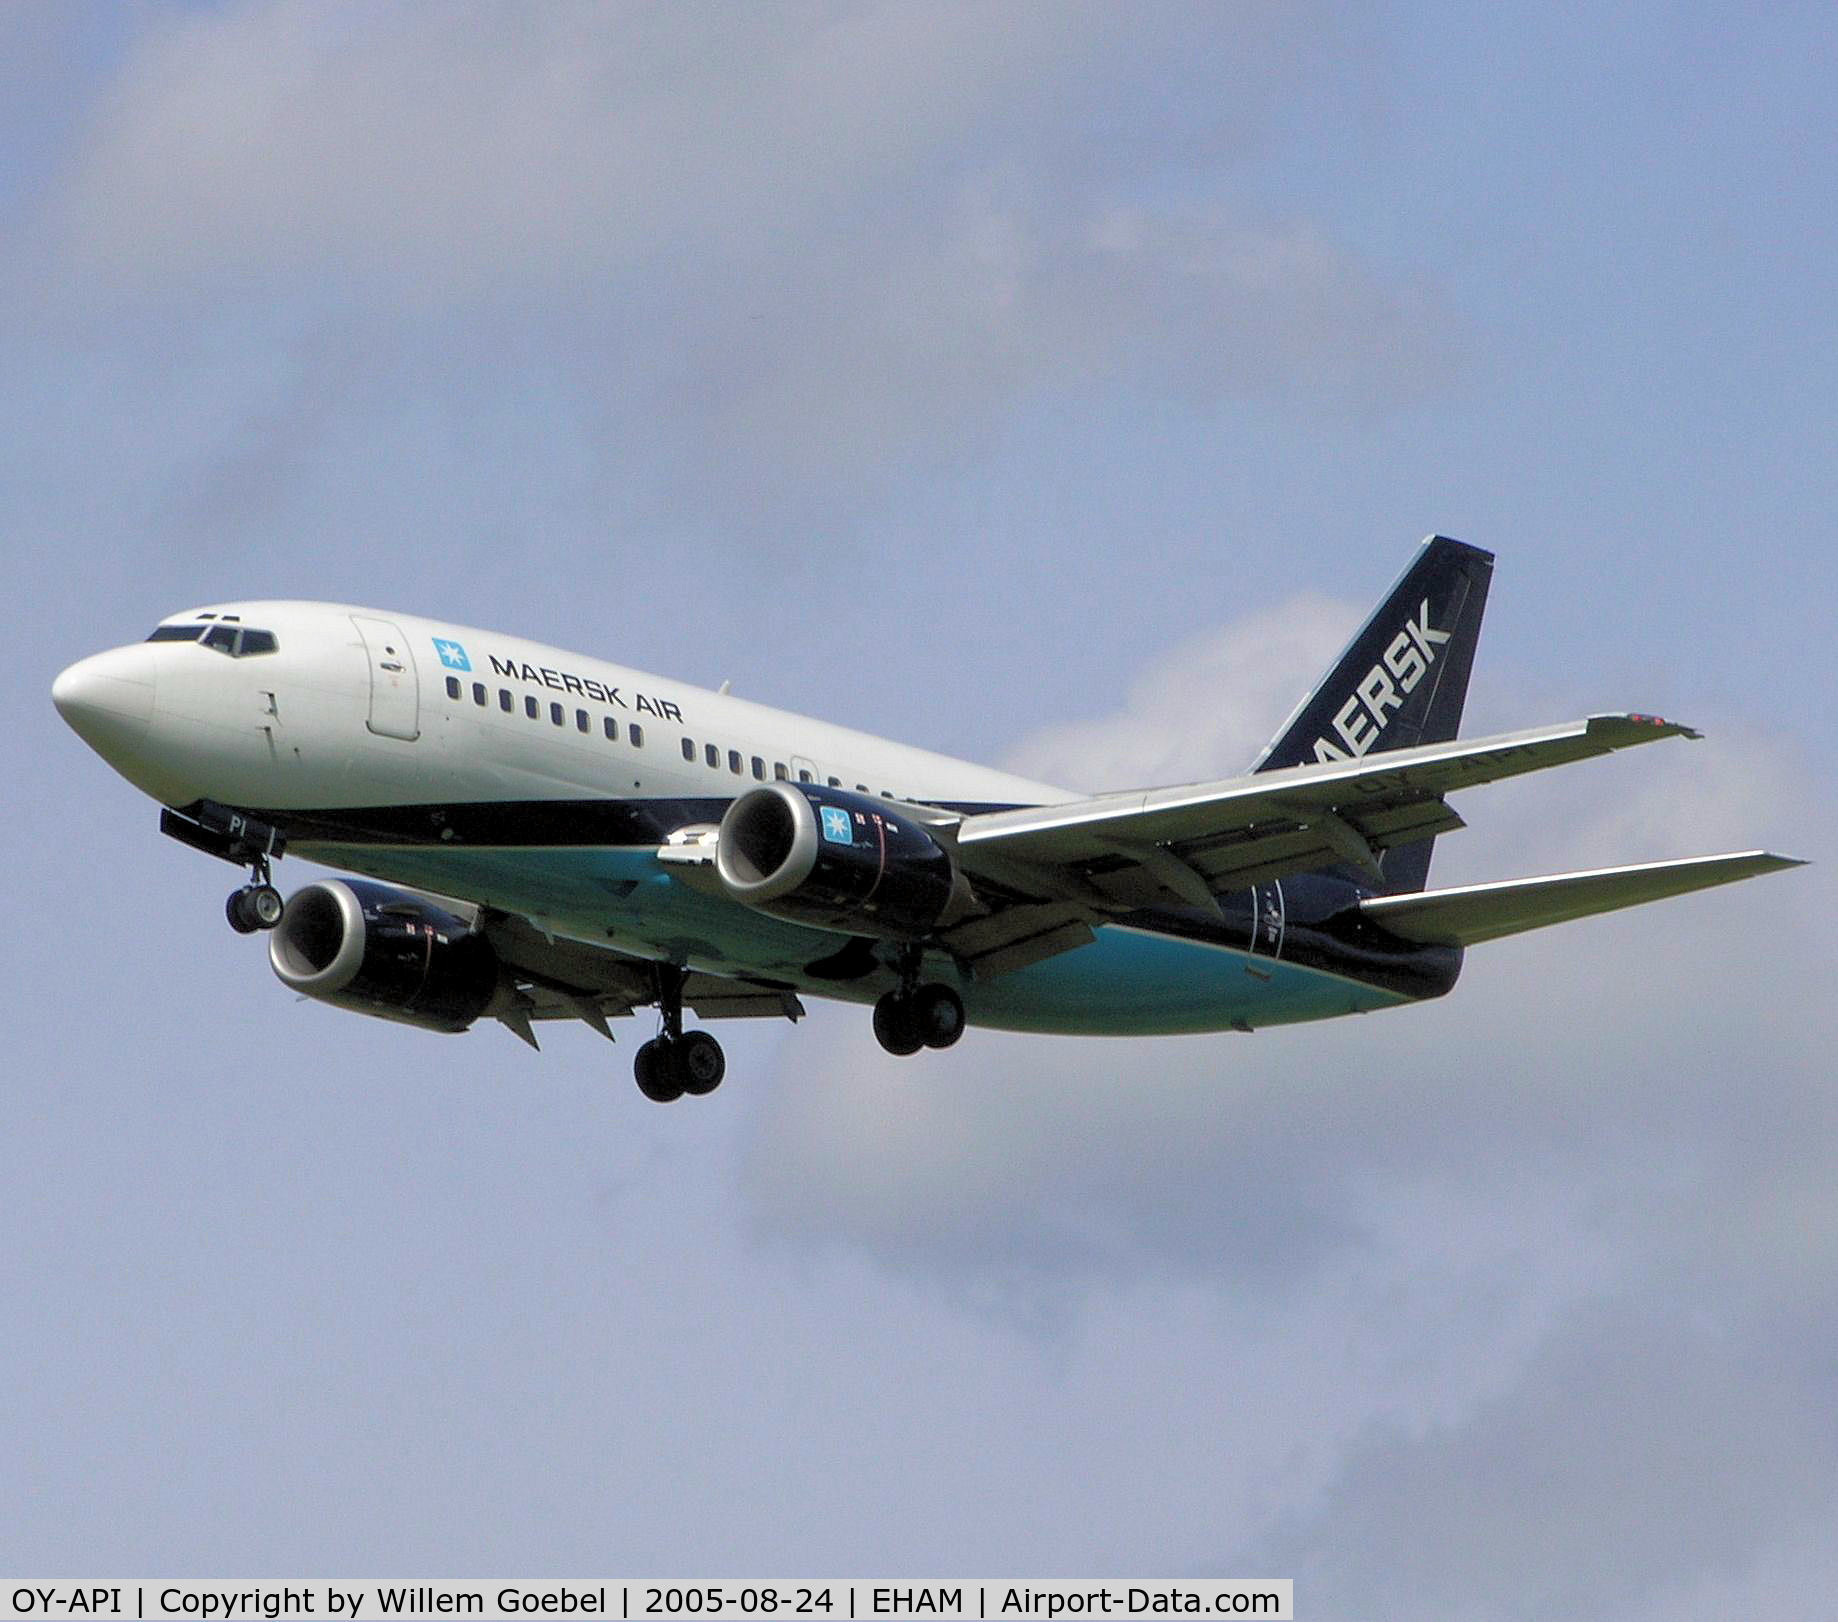 OY-API, 1997 Boeing 737-5L9 C/N 28722, Landing on runway C18 from Schiphol Airport Amsterdam